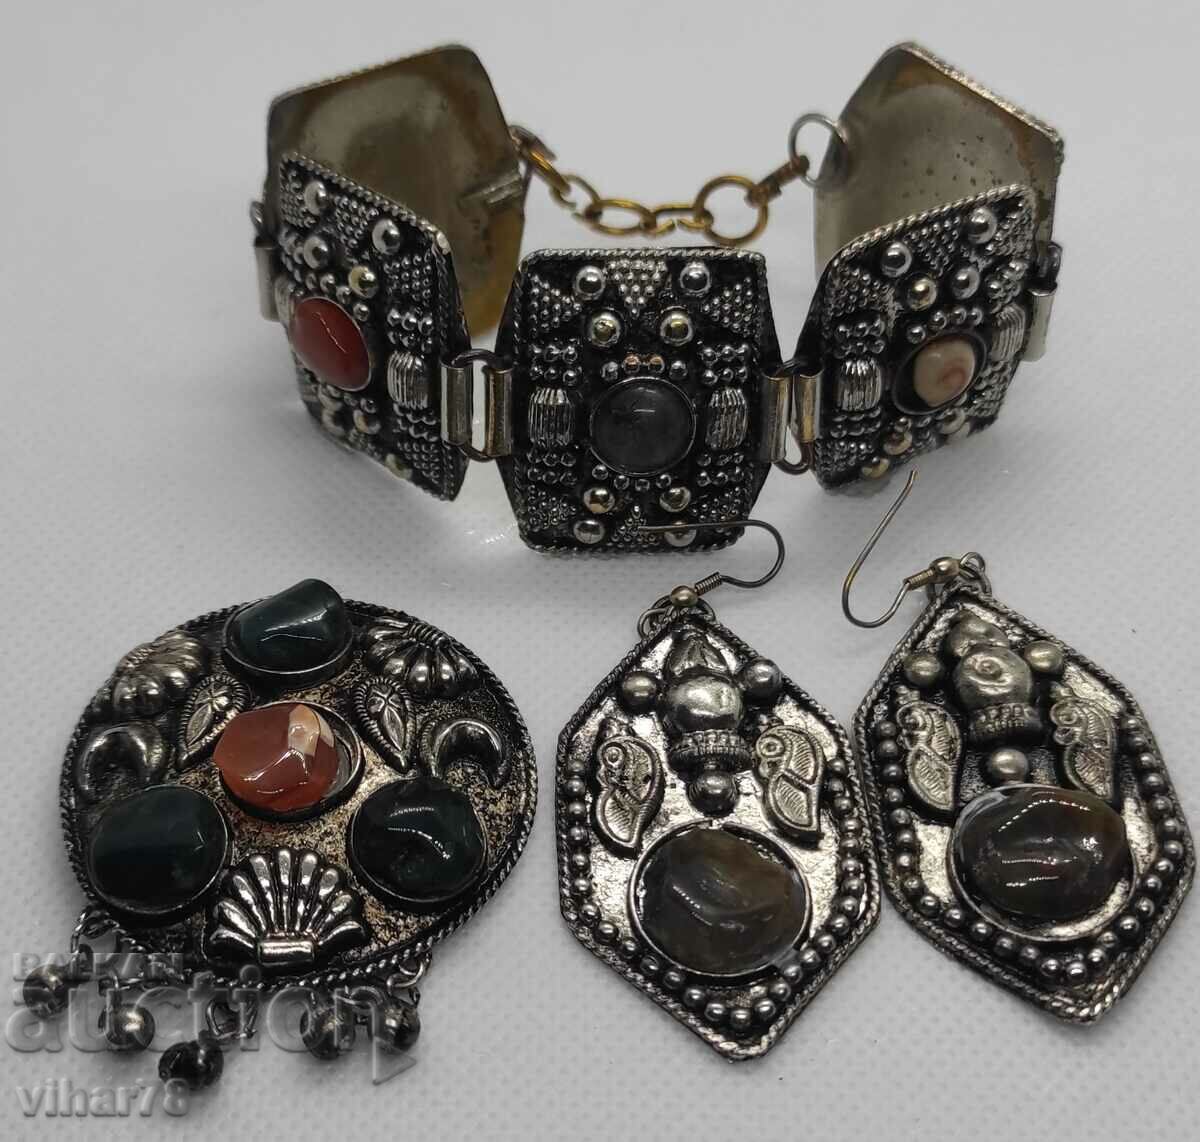 Old women's set with stones-bracelet, earrings and pendant